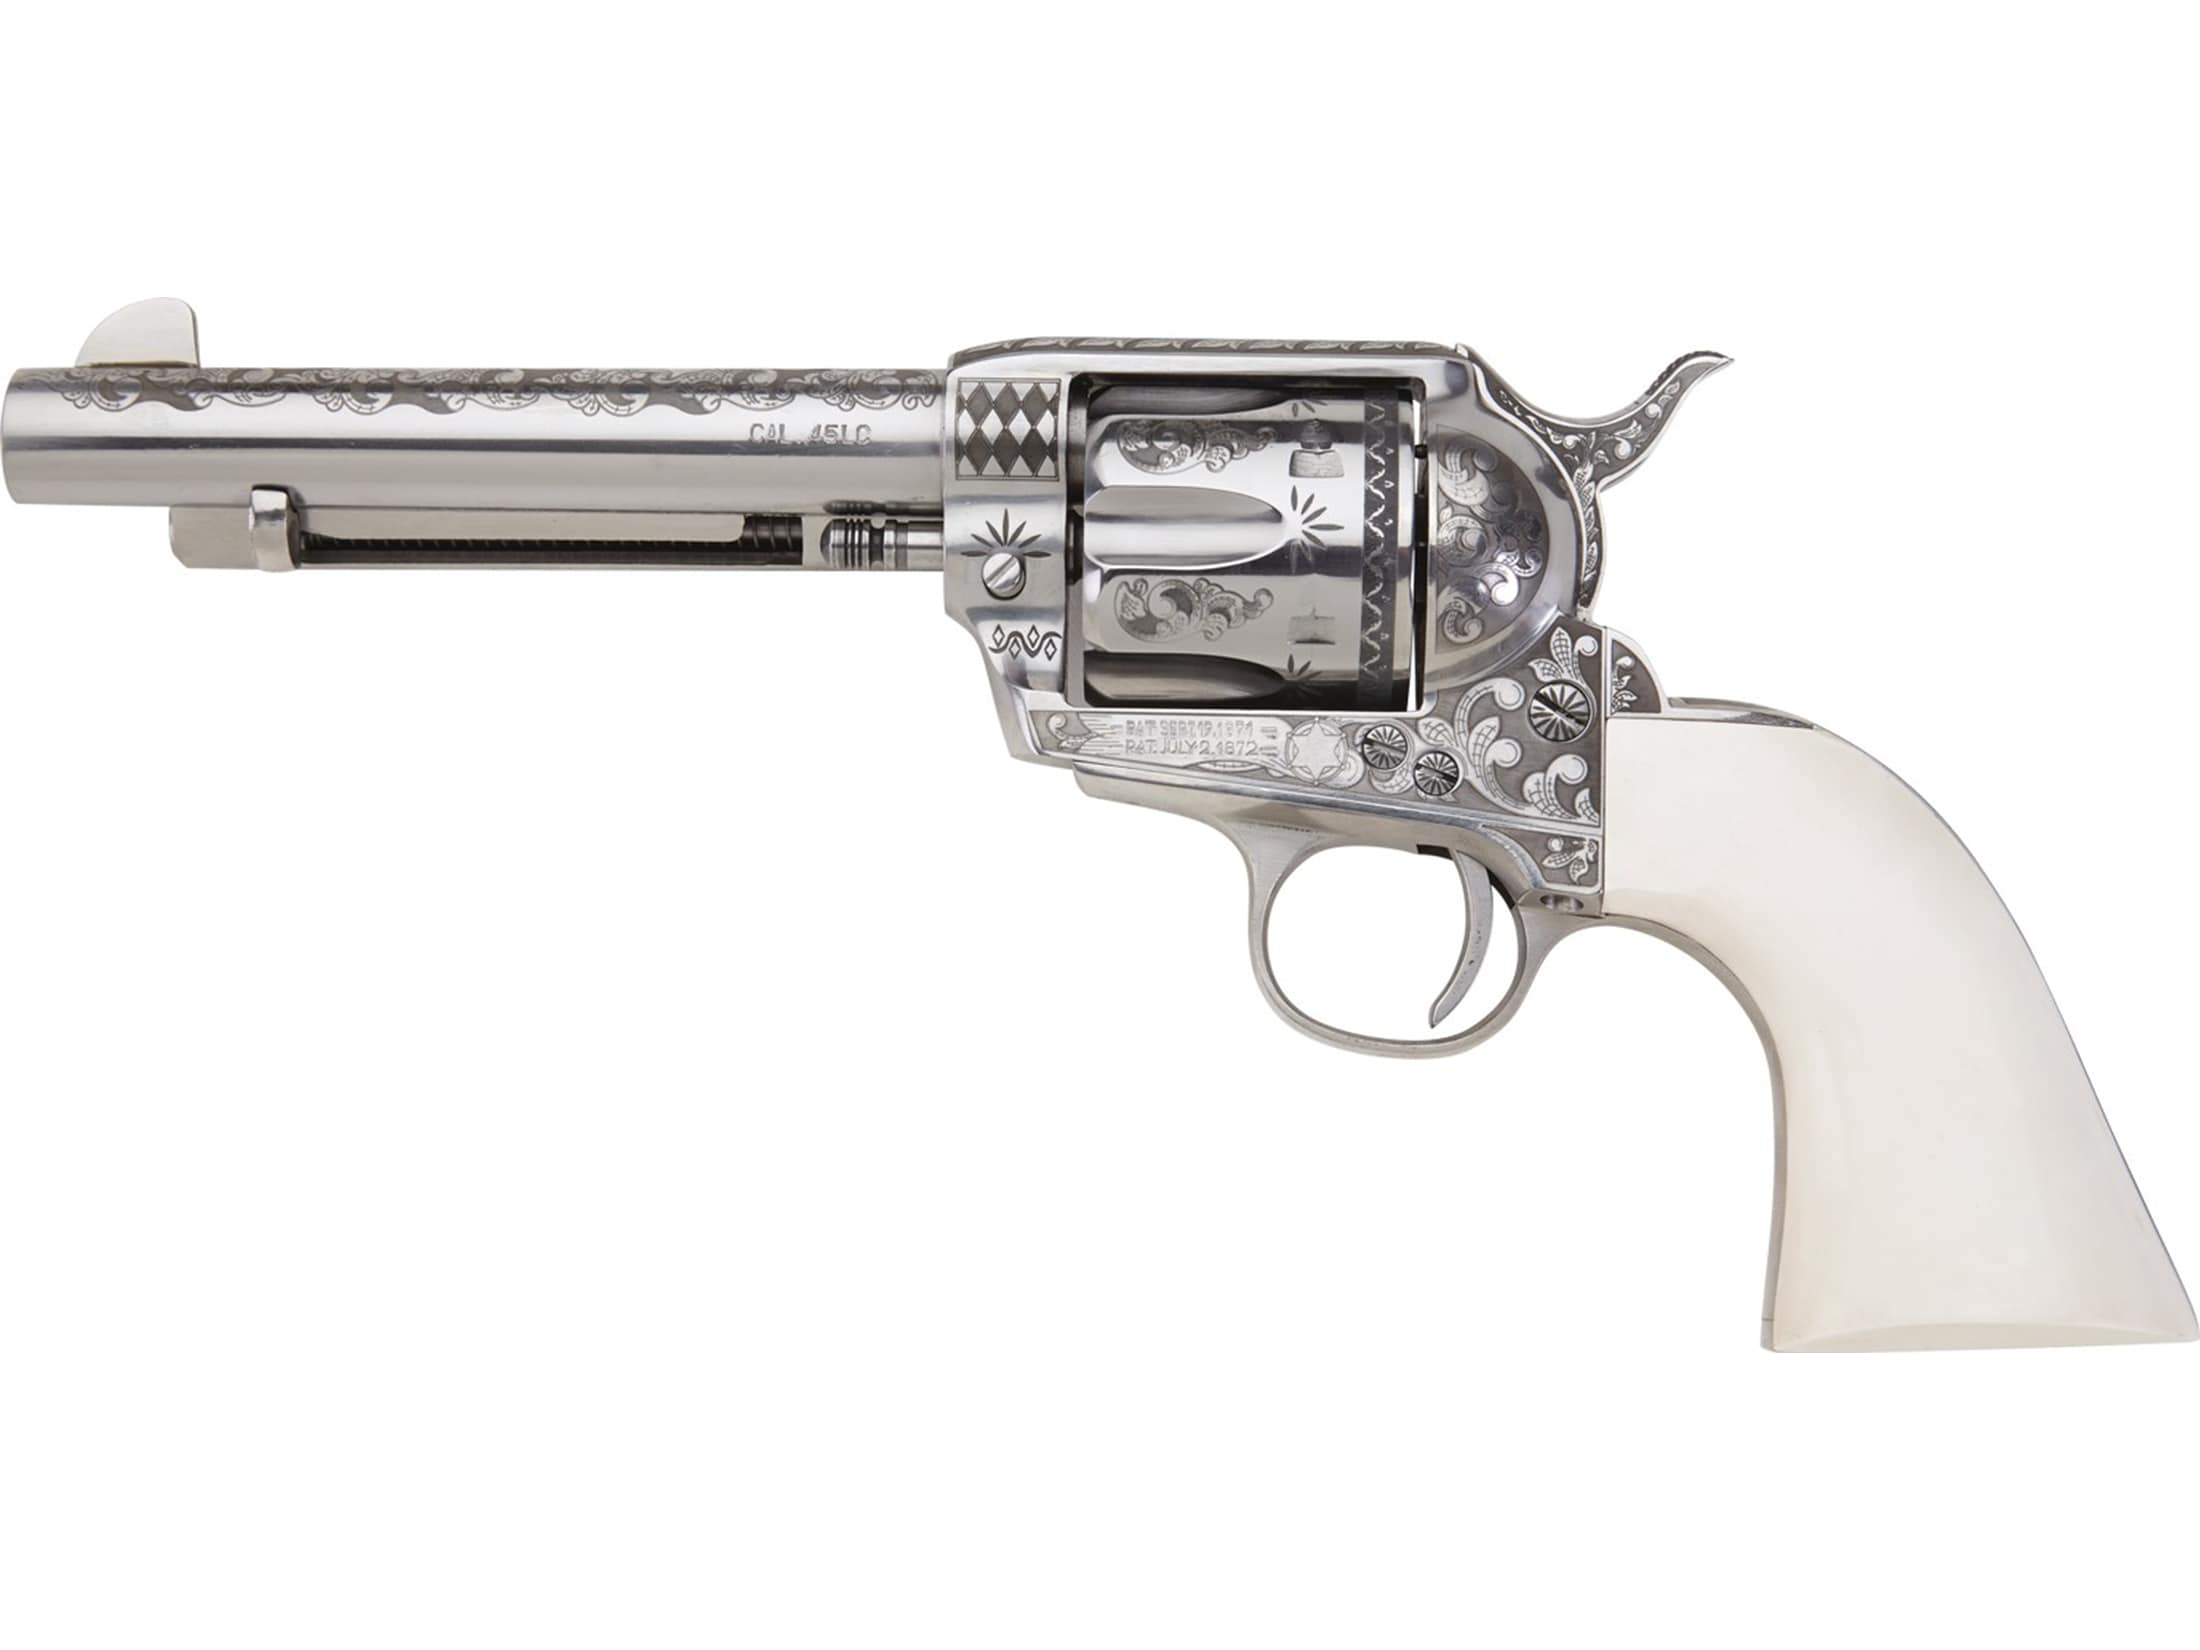 Image of EMF Company General Patton Pistol 357 Magnum 3.5" Stainless Barrel, 6-Round Stainless Engraved Frame Simulated Ivory Grip